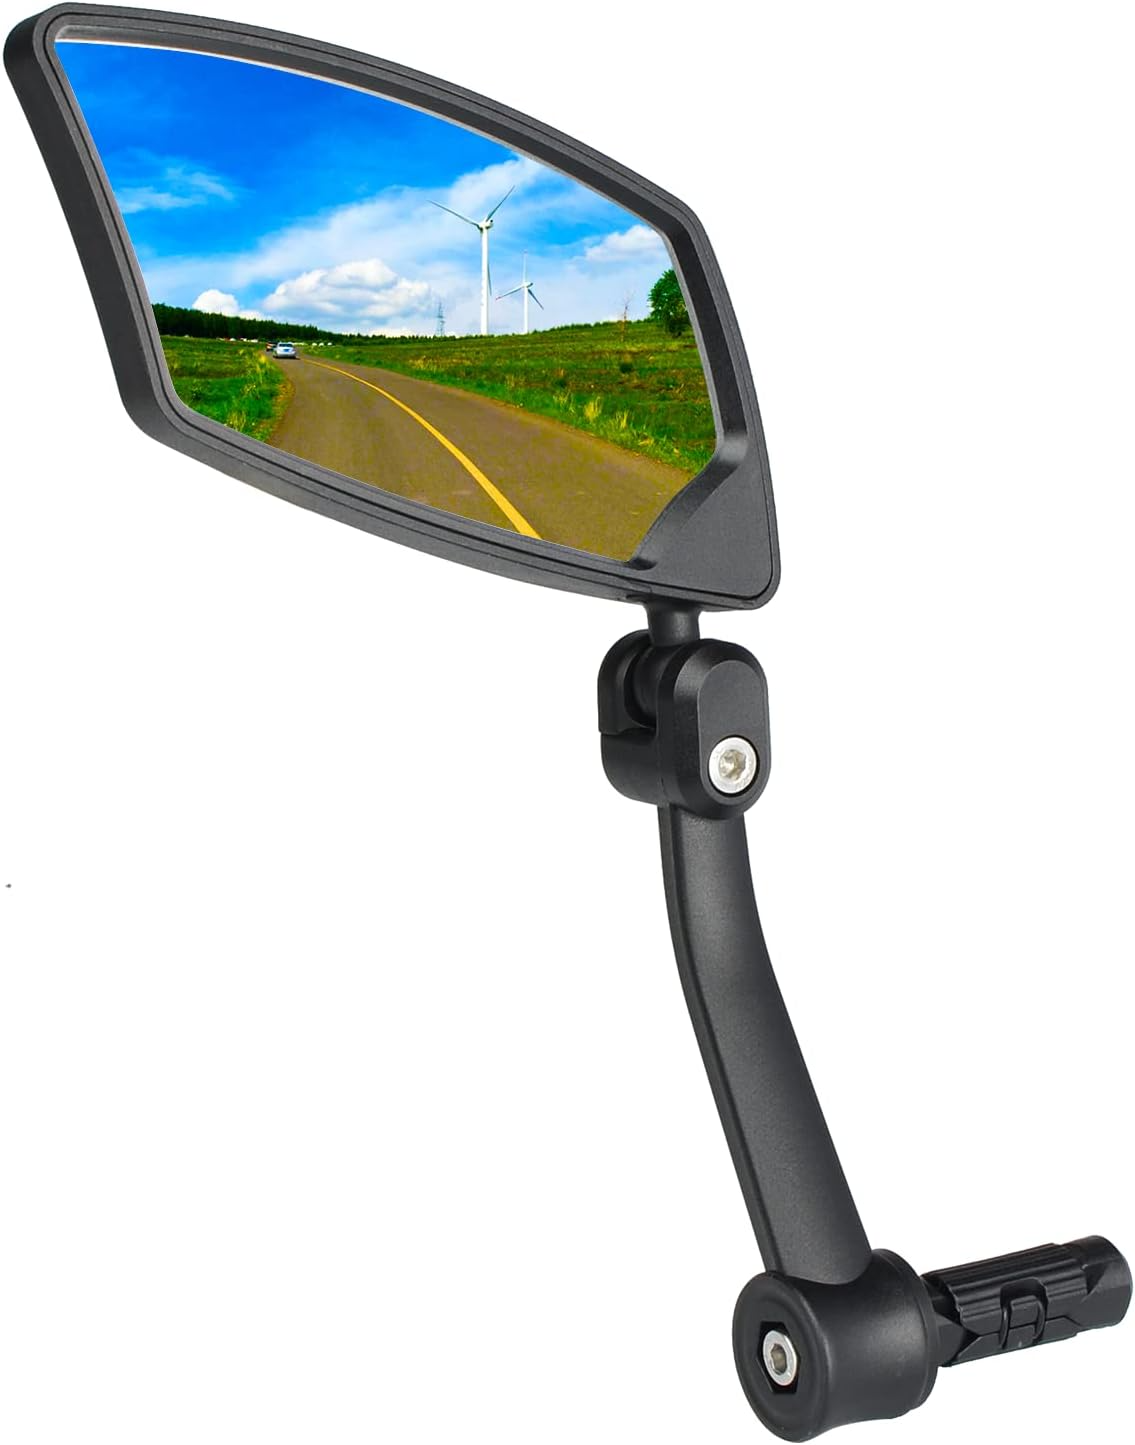 Side view Tampa Bay eBikes Premium Bar End Left bicycle rearview mirror reflecting a scenic road and wind turbines under a blue sky.